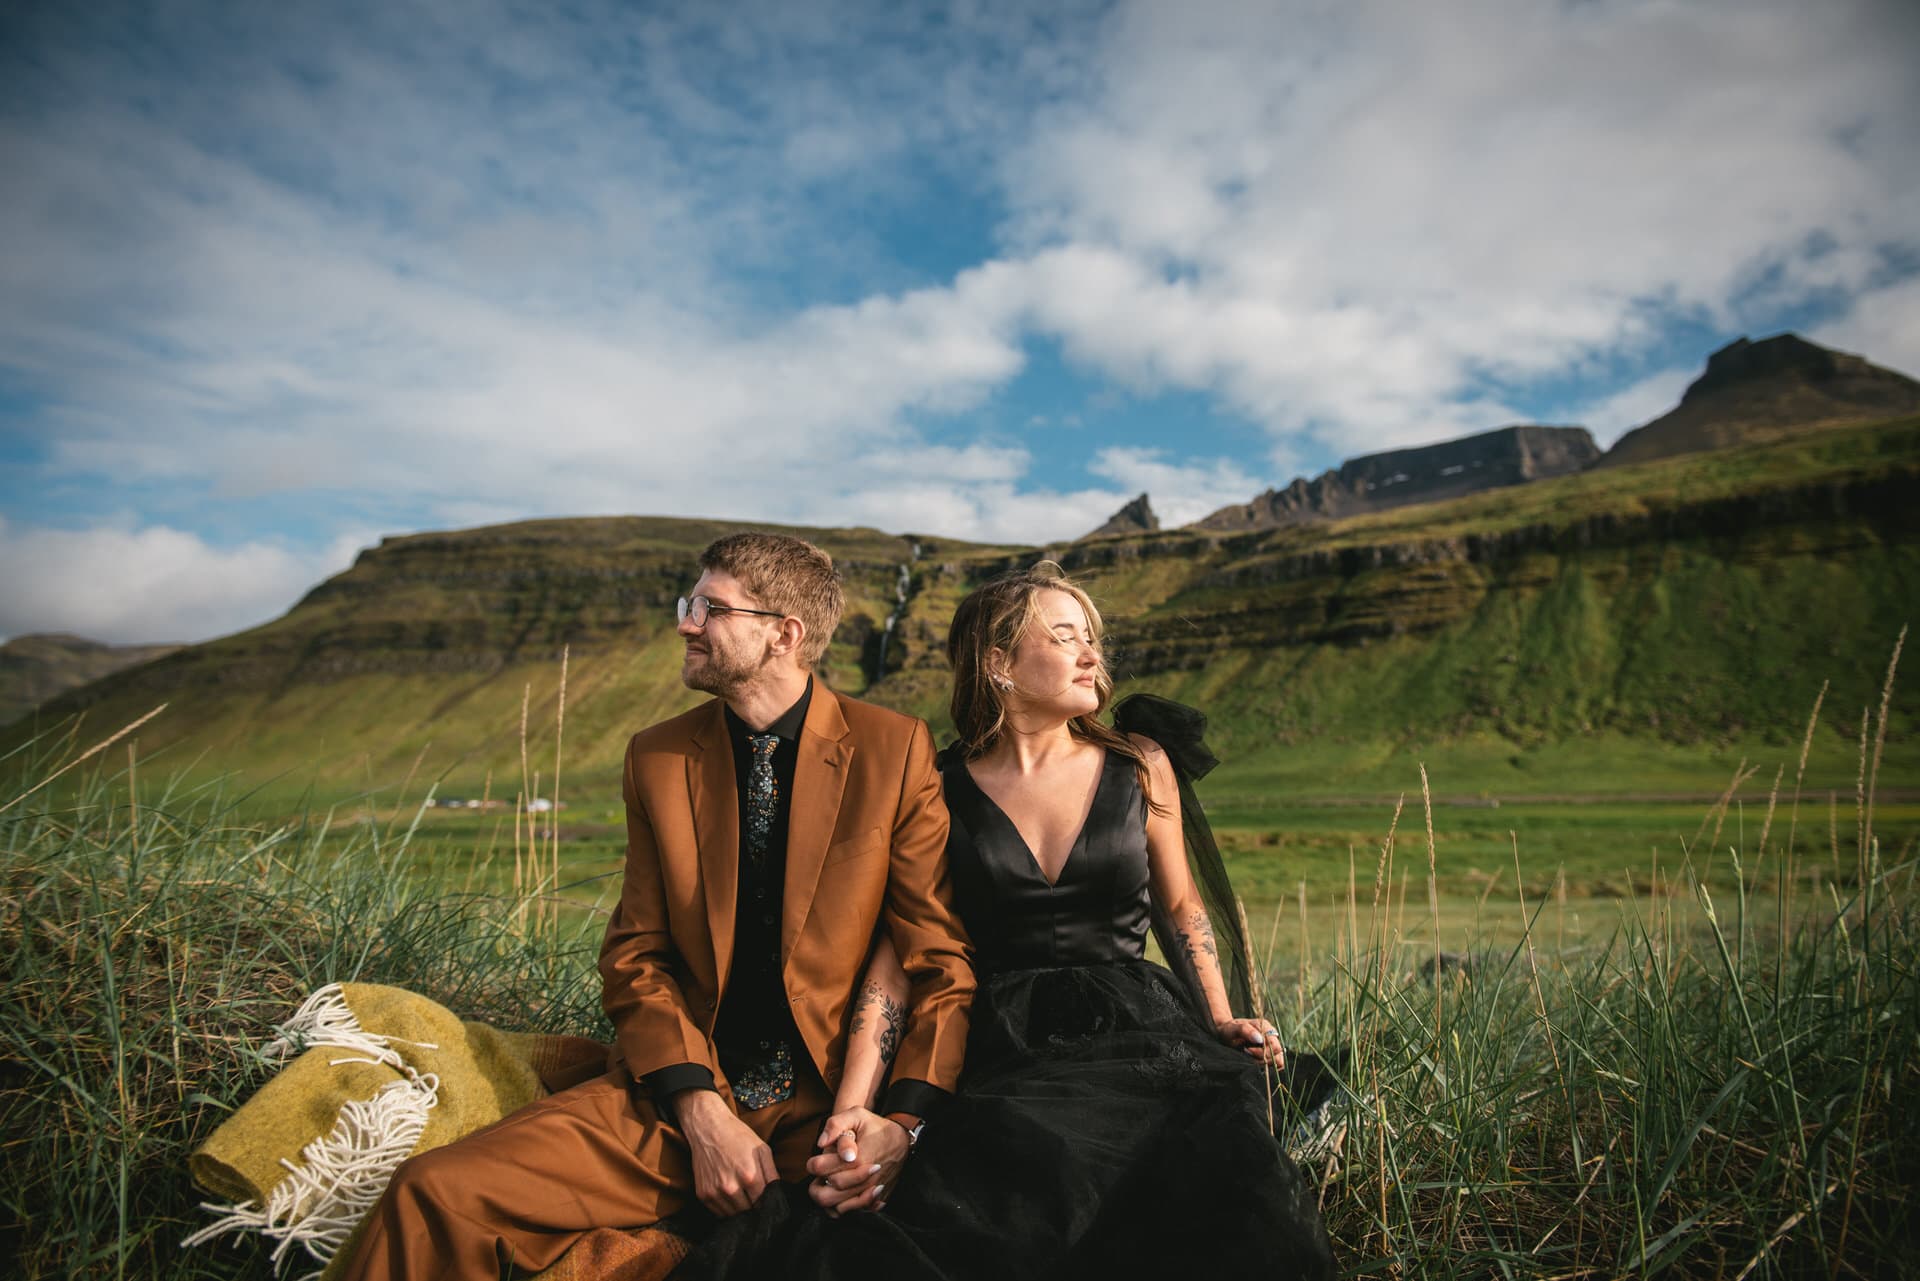 Groom's loving embrace warms the bride amidst the awe-inspiring Westfjords.